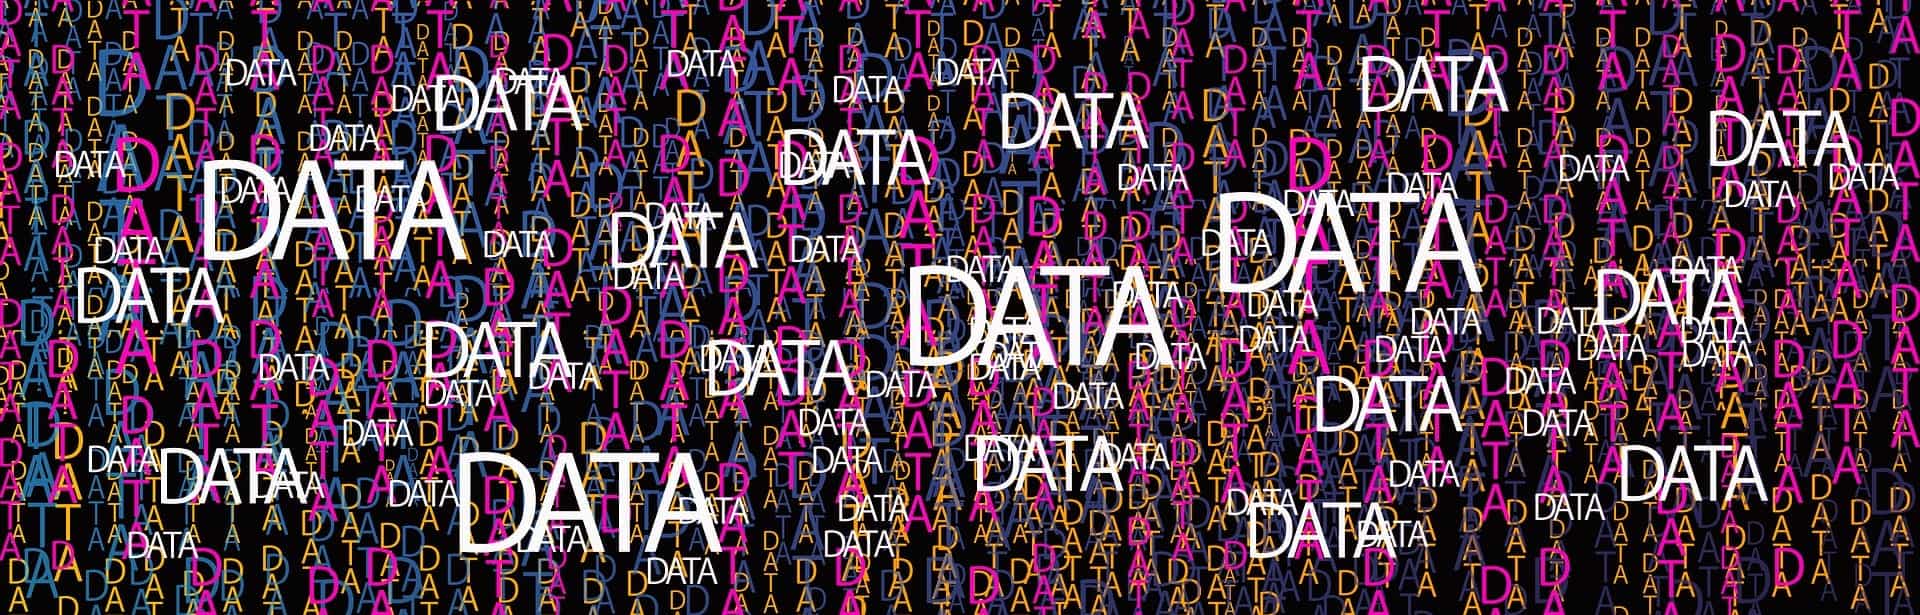 collage of data text in the colors white purple and yellow